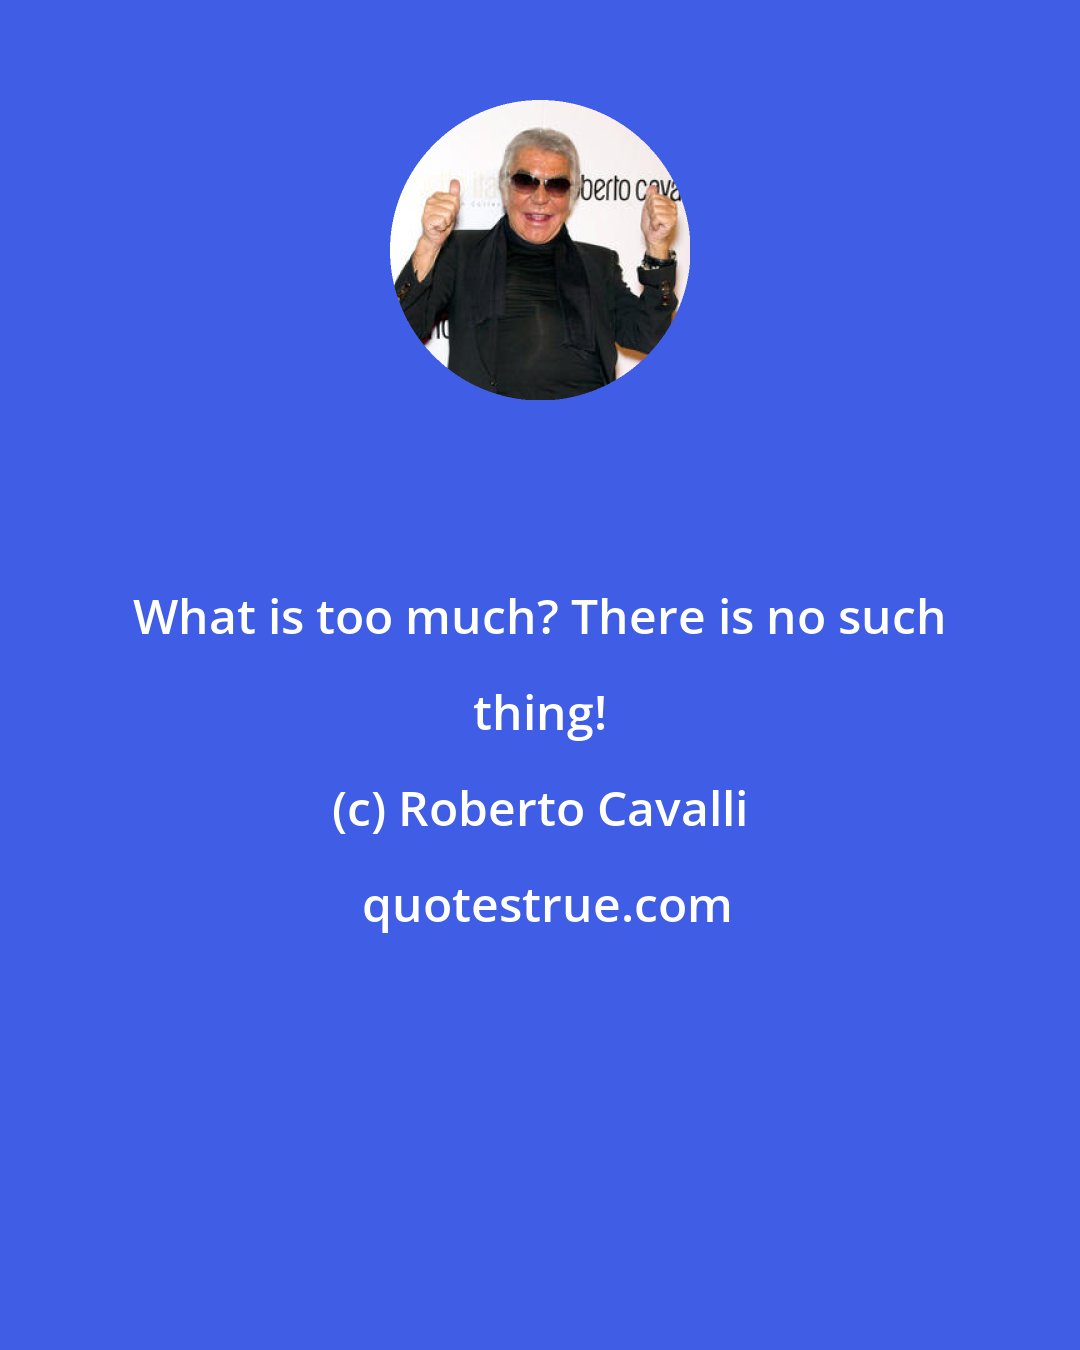 Roberto Cavalli: What is too much? There is no such thing!